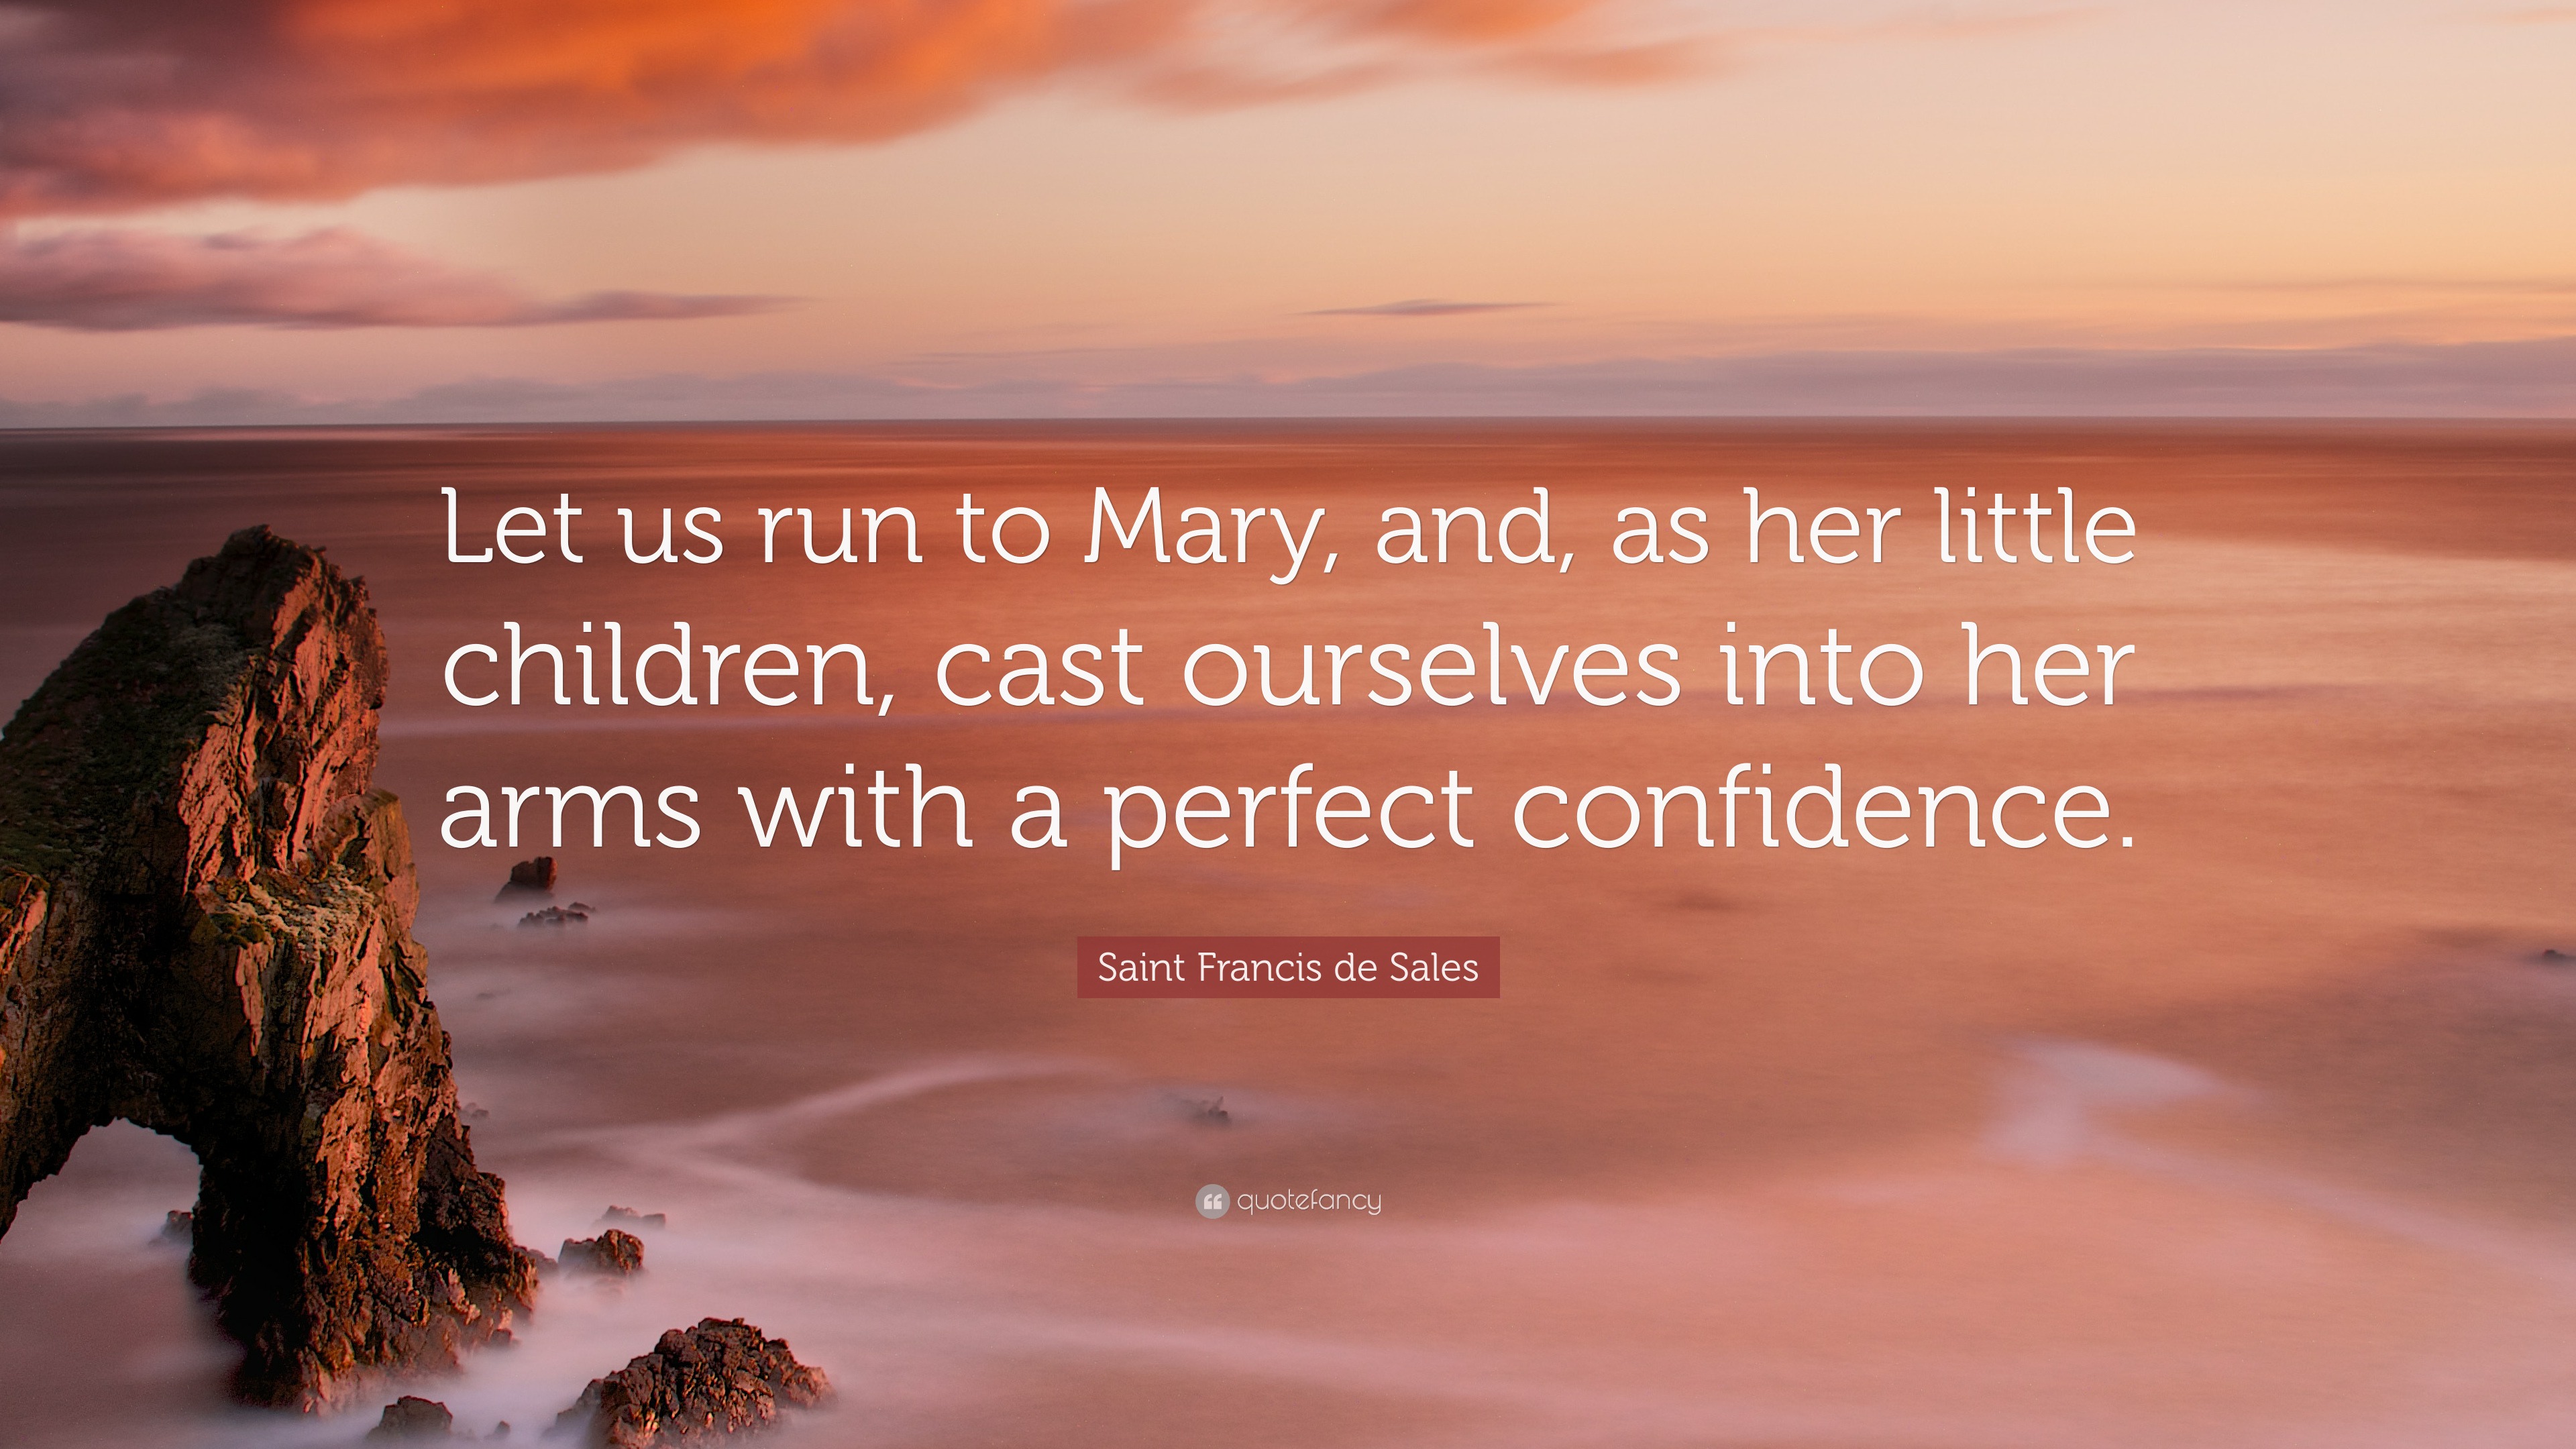 Francis de Sales and cast ourselves into her arms Let us run to Mary as her little children St Catholic Saint Printable